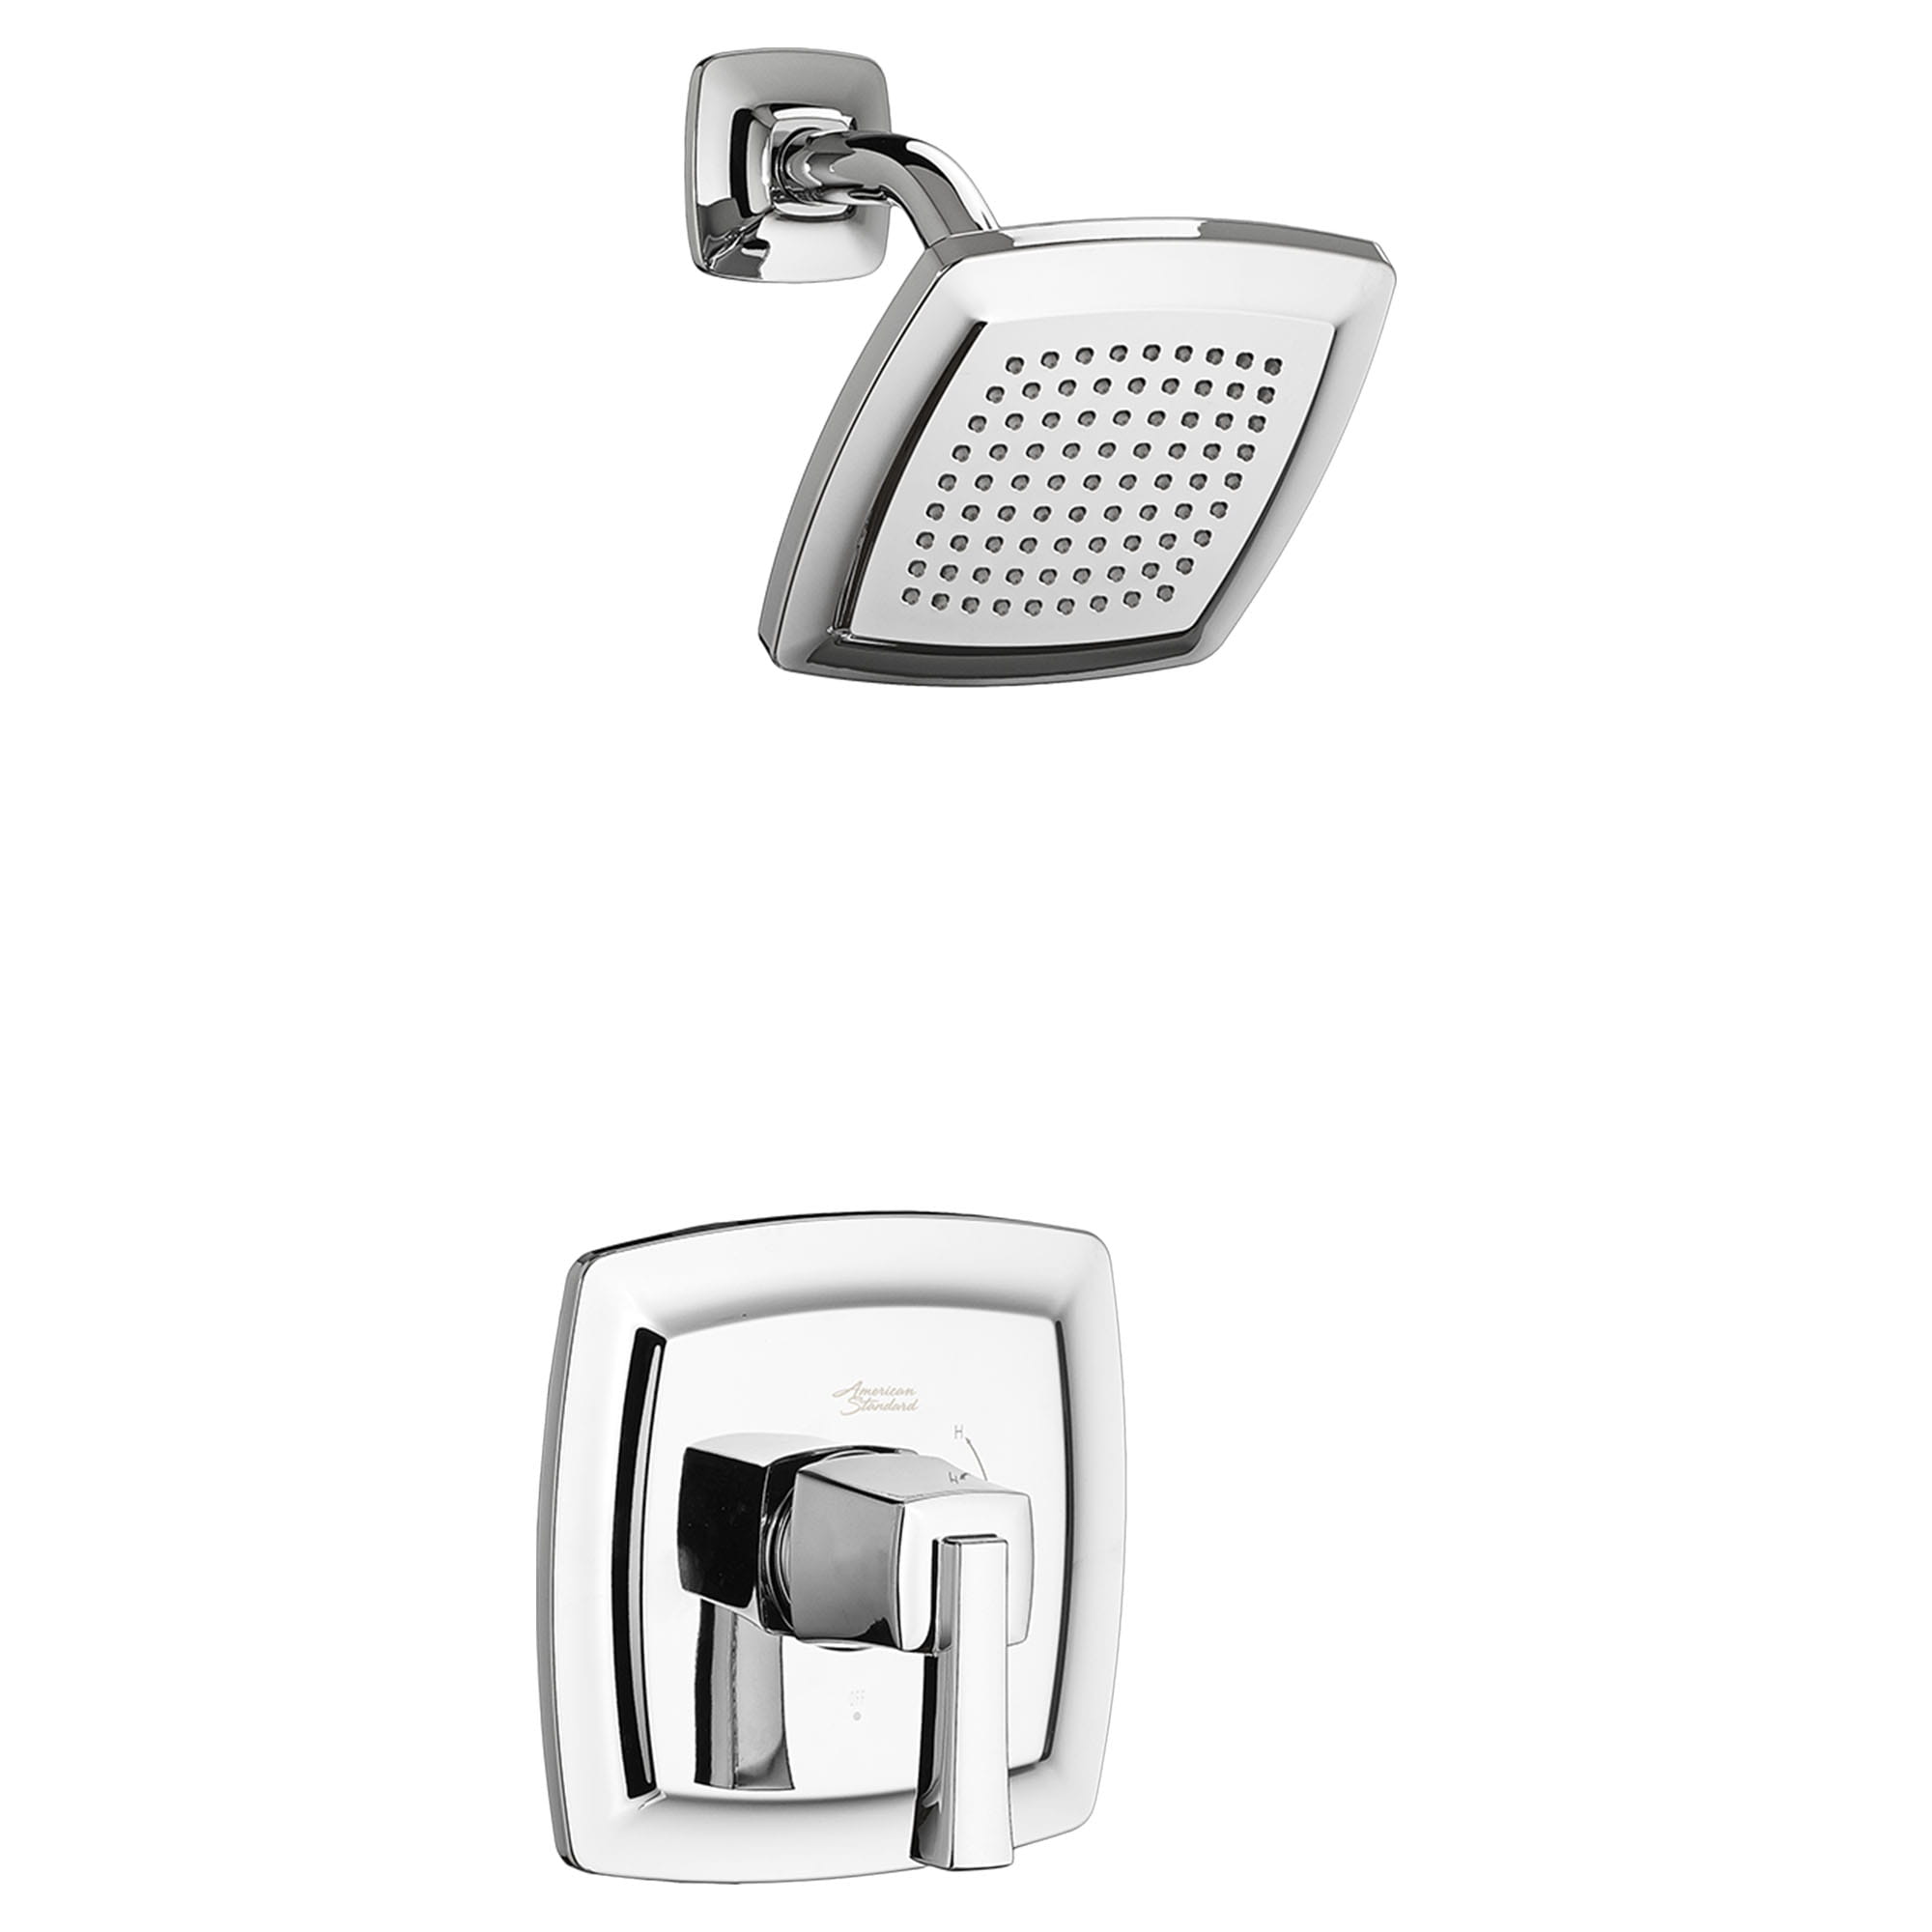 Townsend 175 gpm 66 L min Shower Trim Kit With Water Saving Showerhead Double Ceramic Pressure Balance Cartridge With Lever Handle CHROME